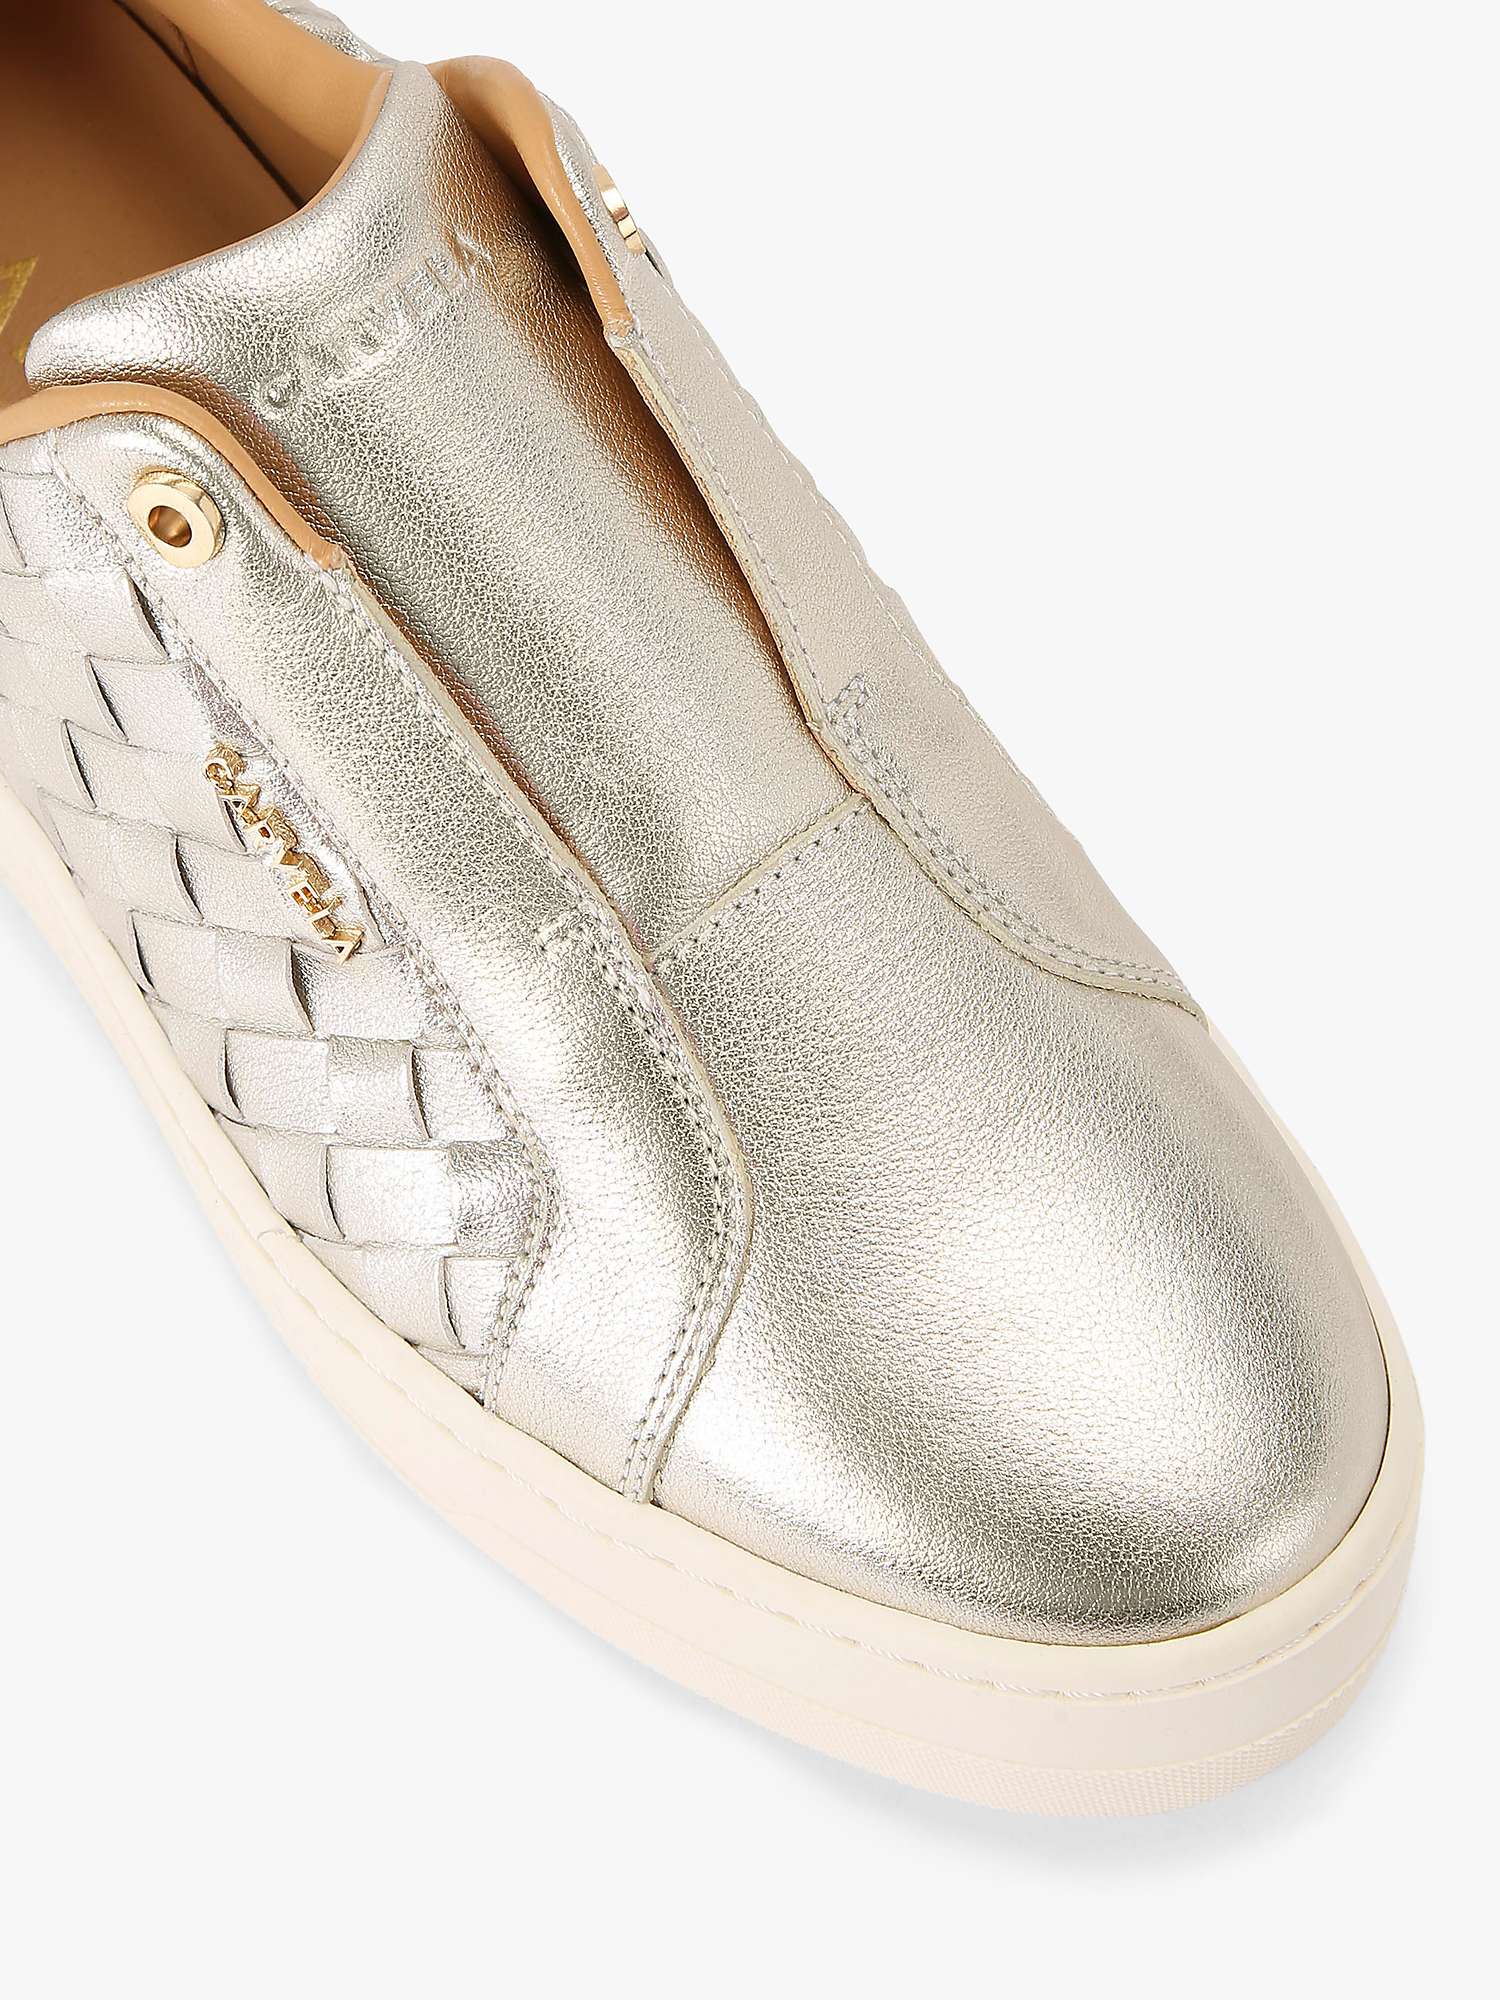 Buy Carvela Leather Laceless Trainers, Gold Online at johnlewis.com